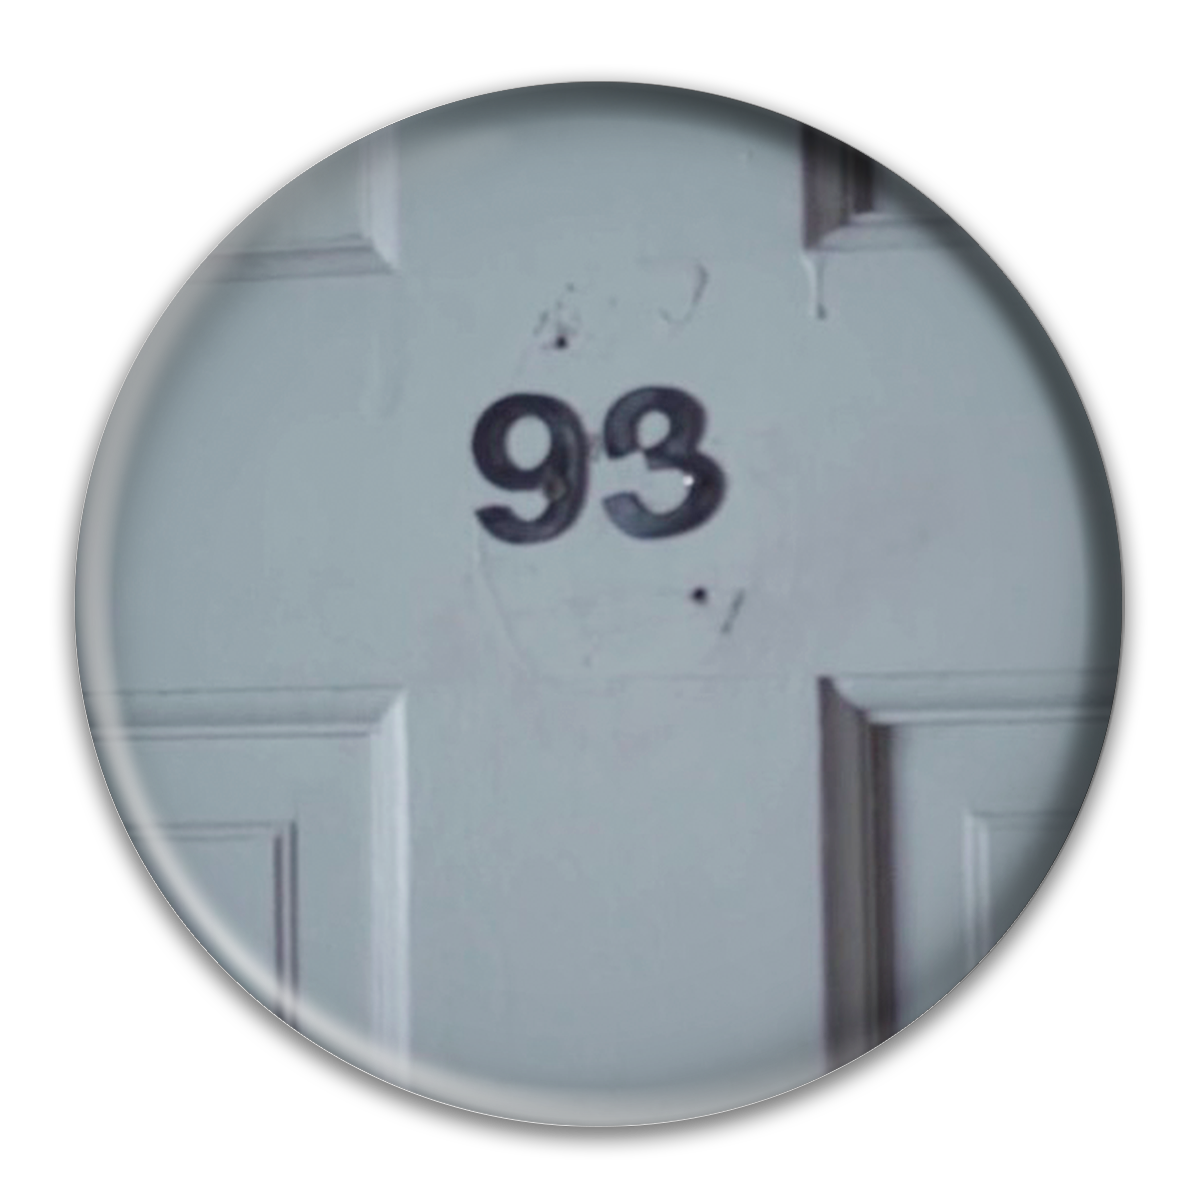 Room 93 Button